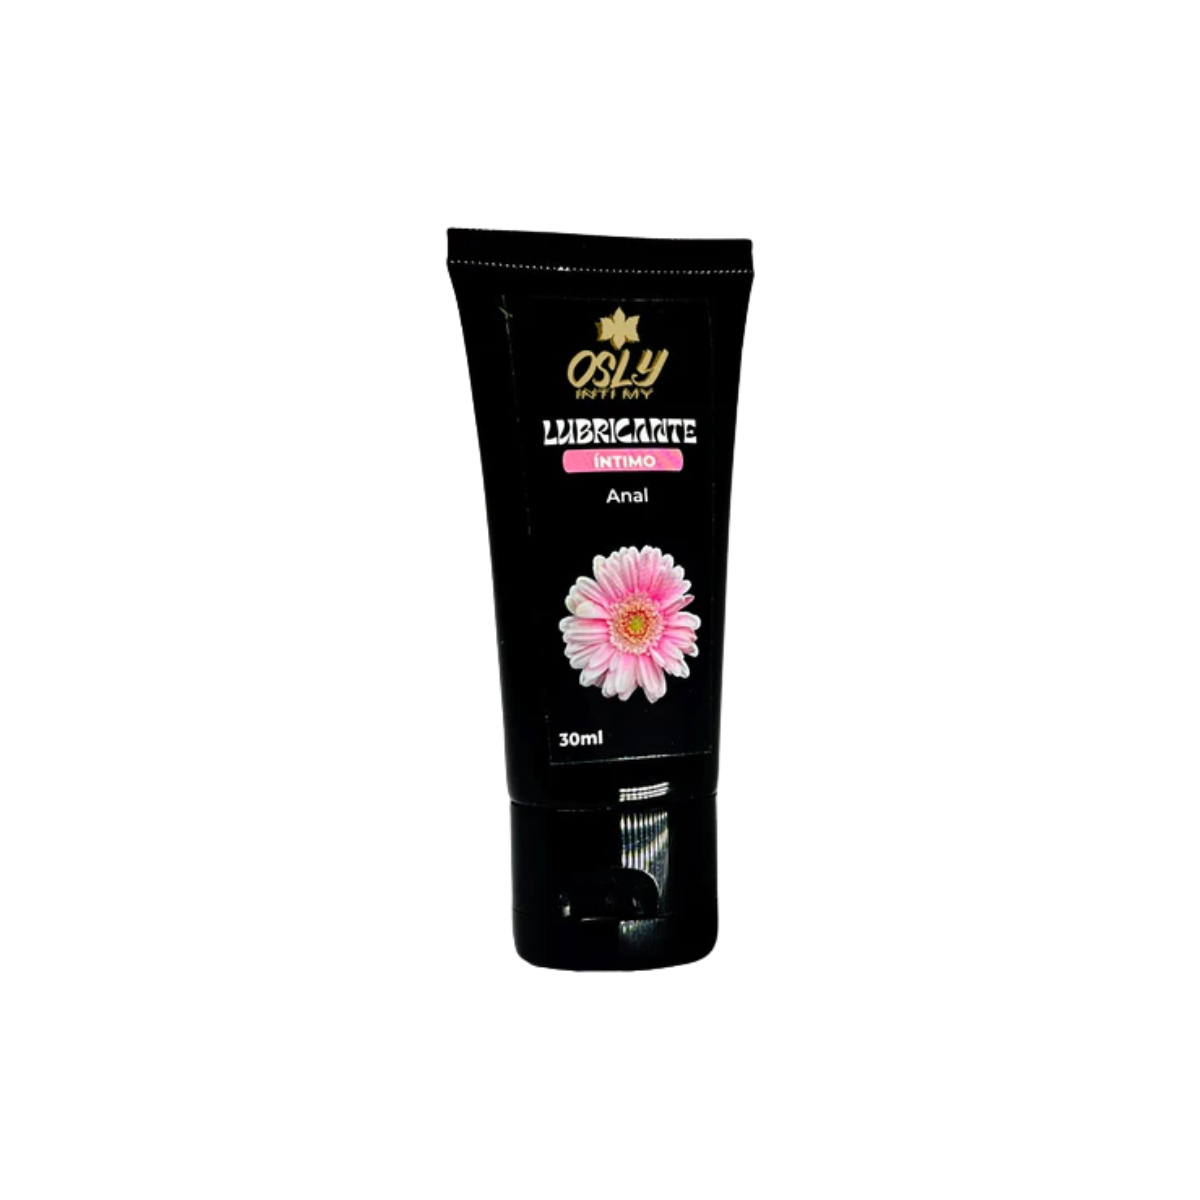 Lubricante Intimo Anal Osly X 30ml